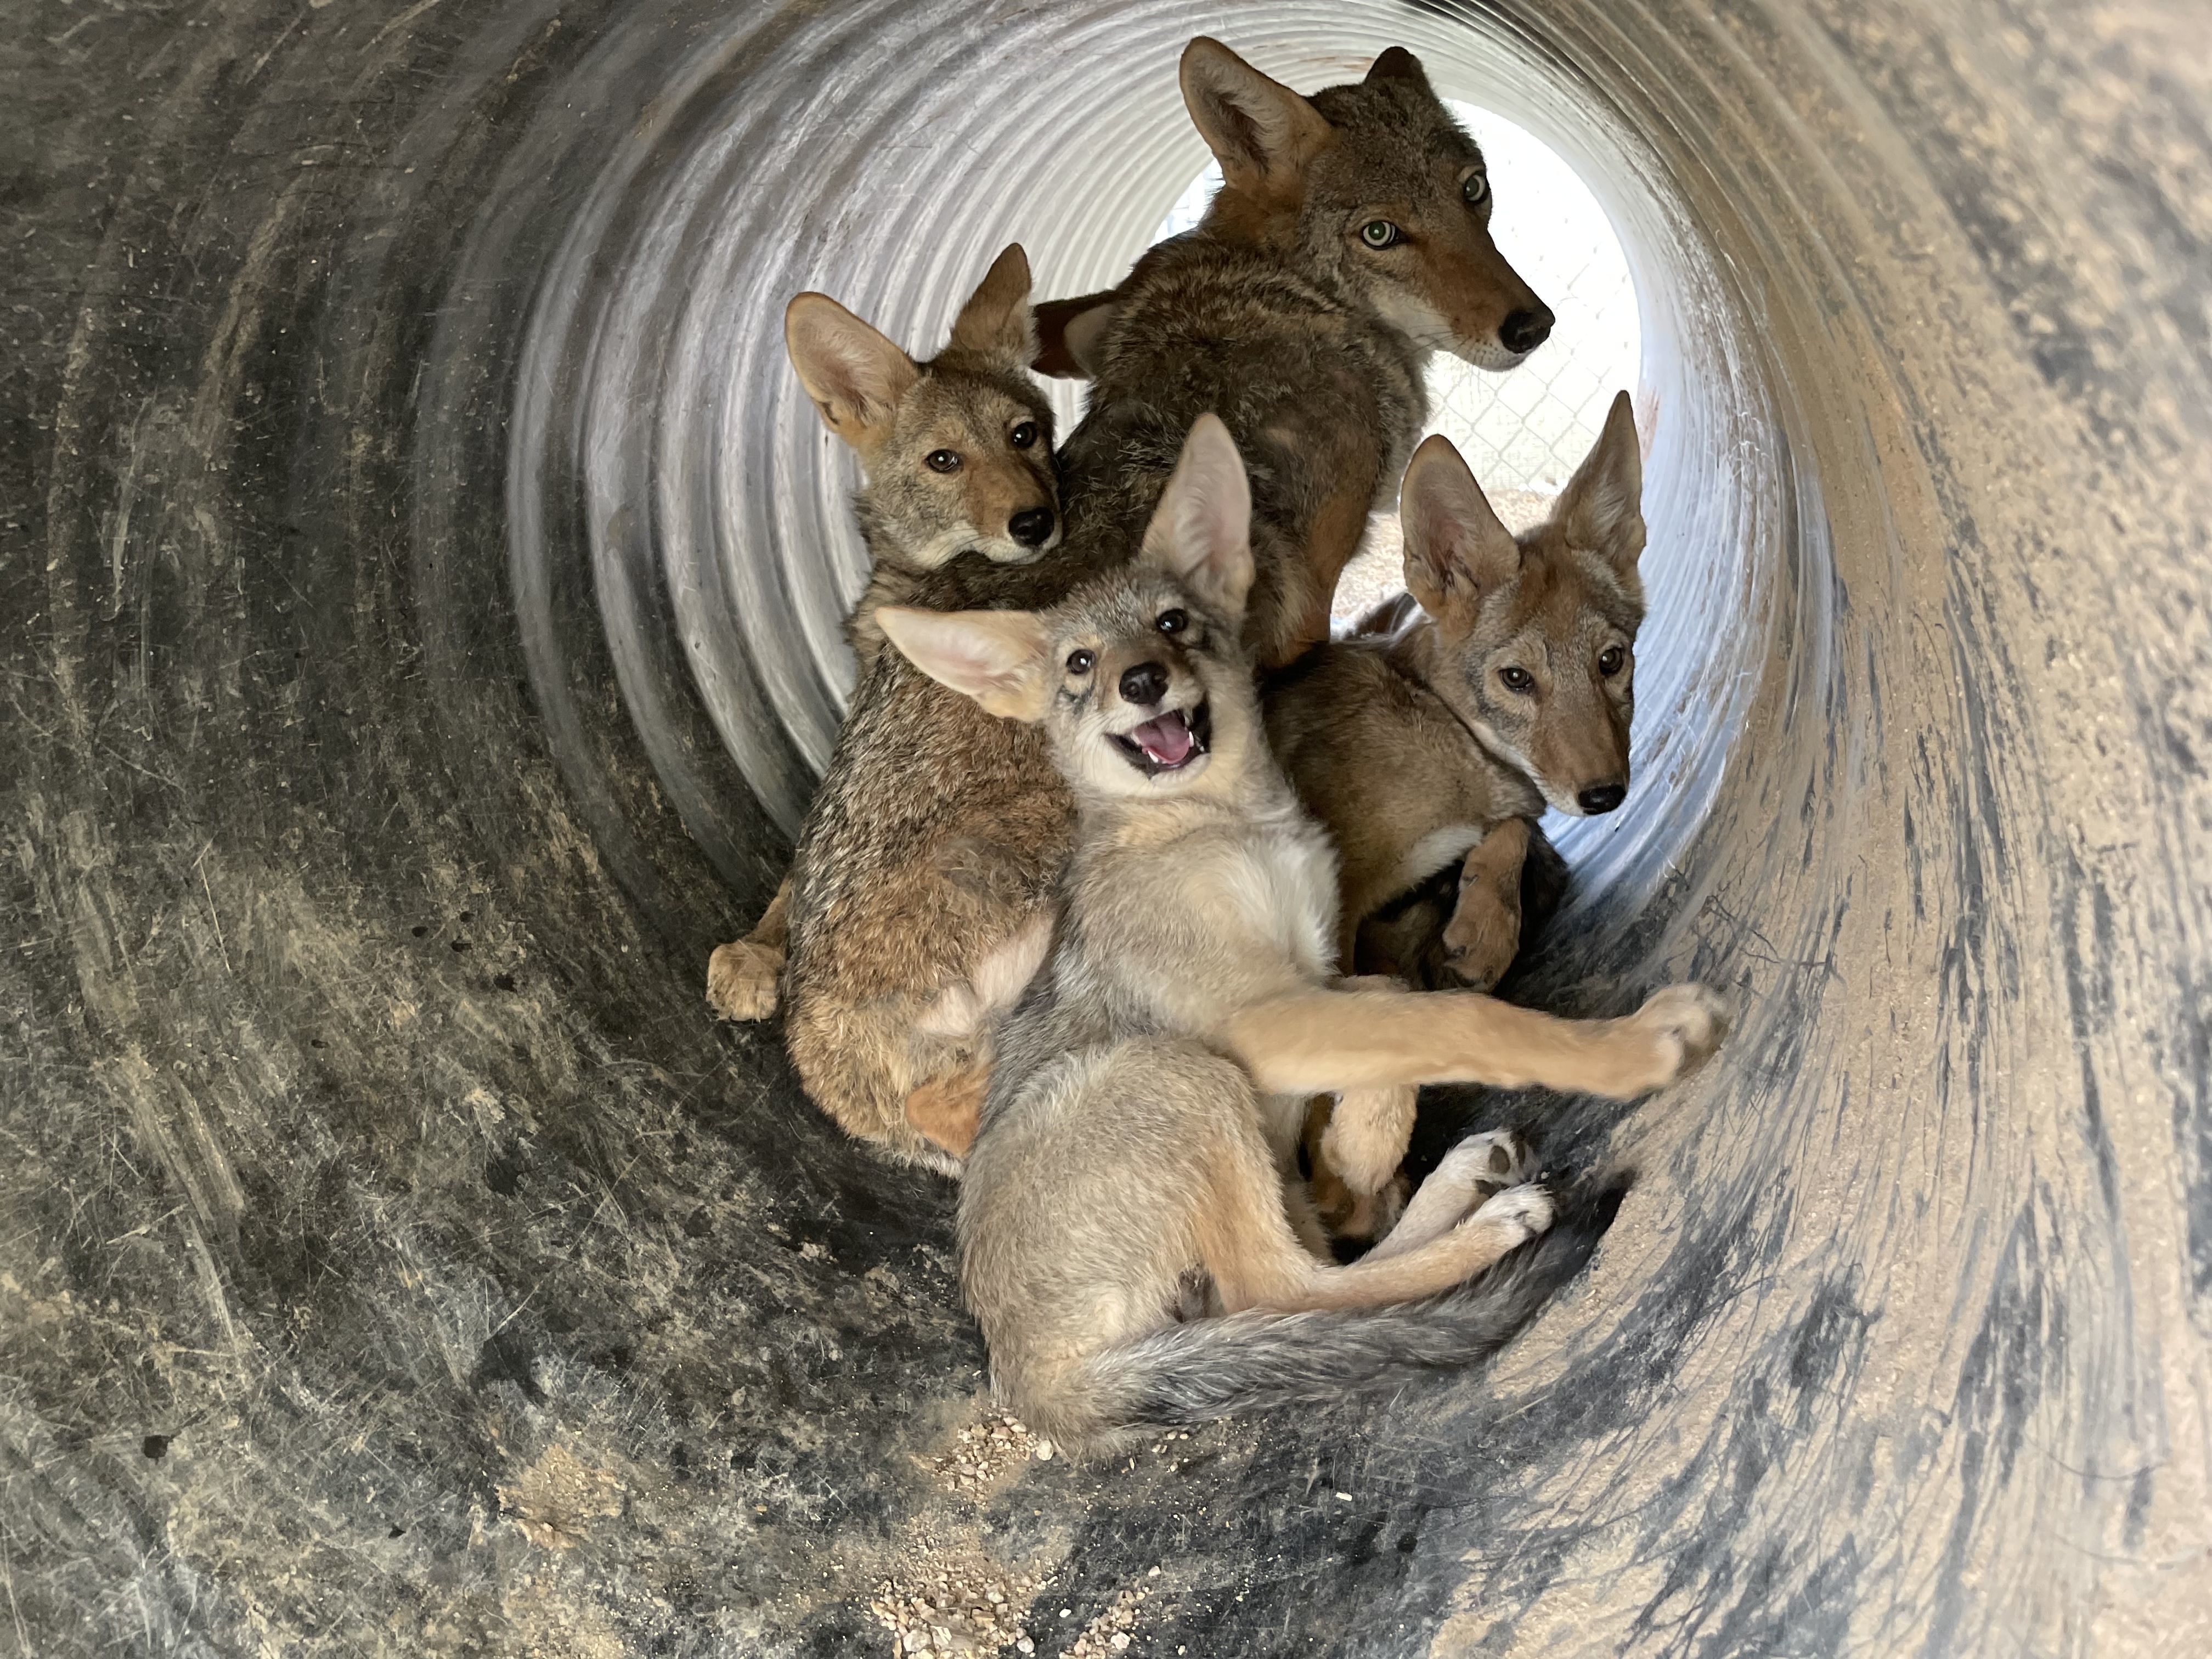 Moon, Coyote Foster Dad, huddles together in a tube with his three foster puppies - teaching them to fear humans and stay wild.